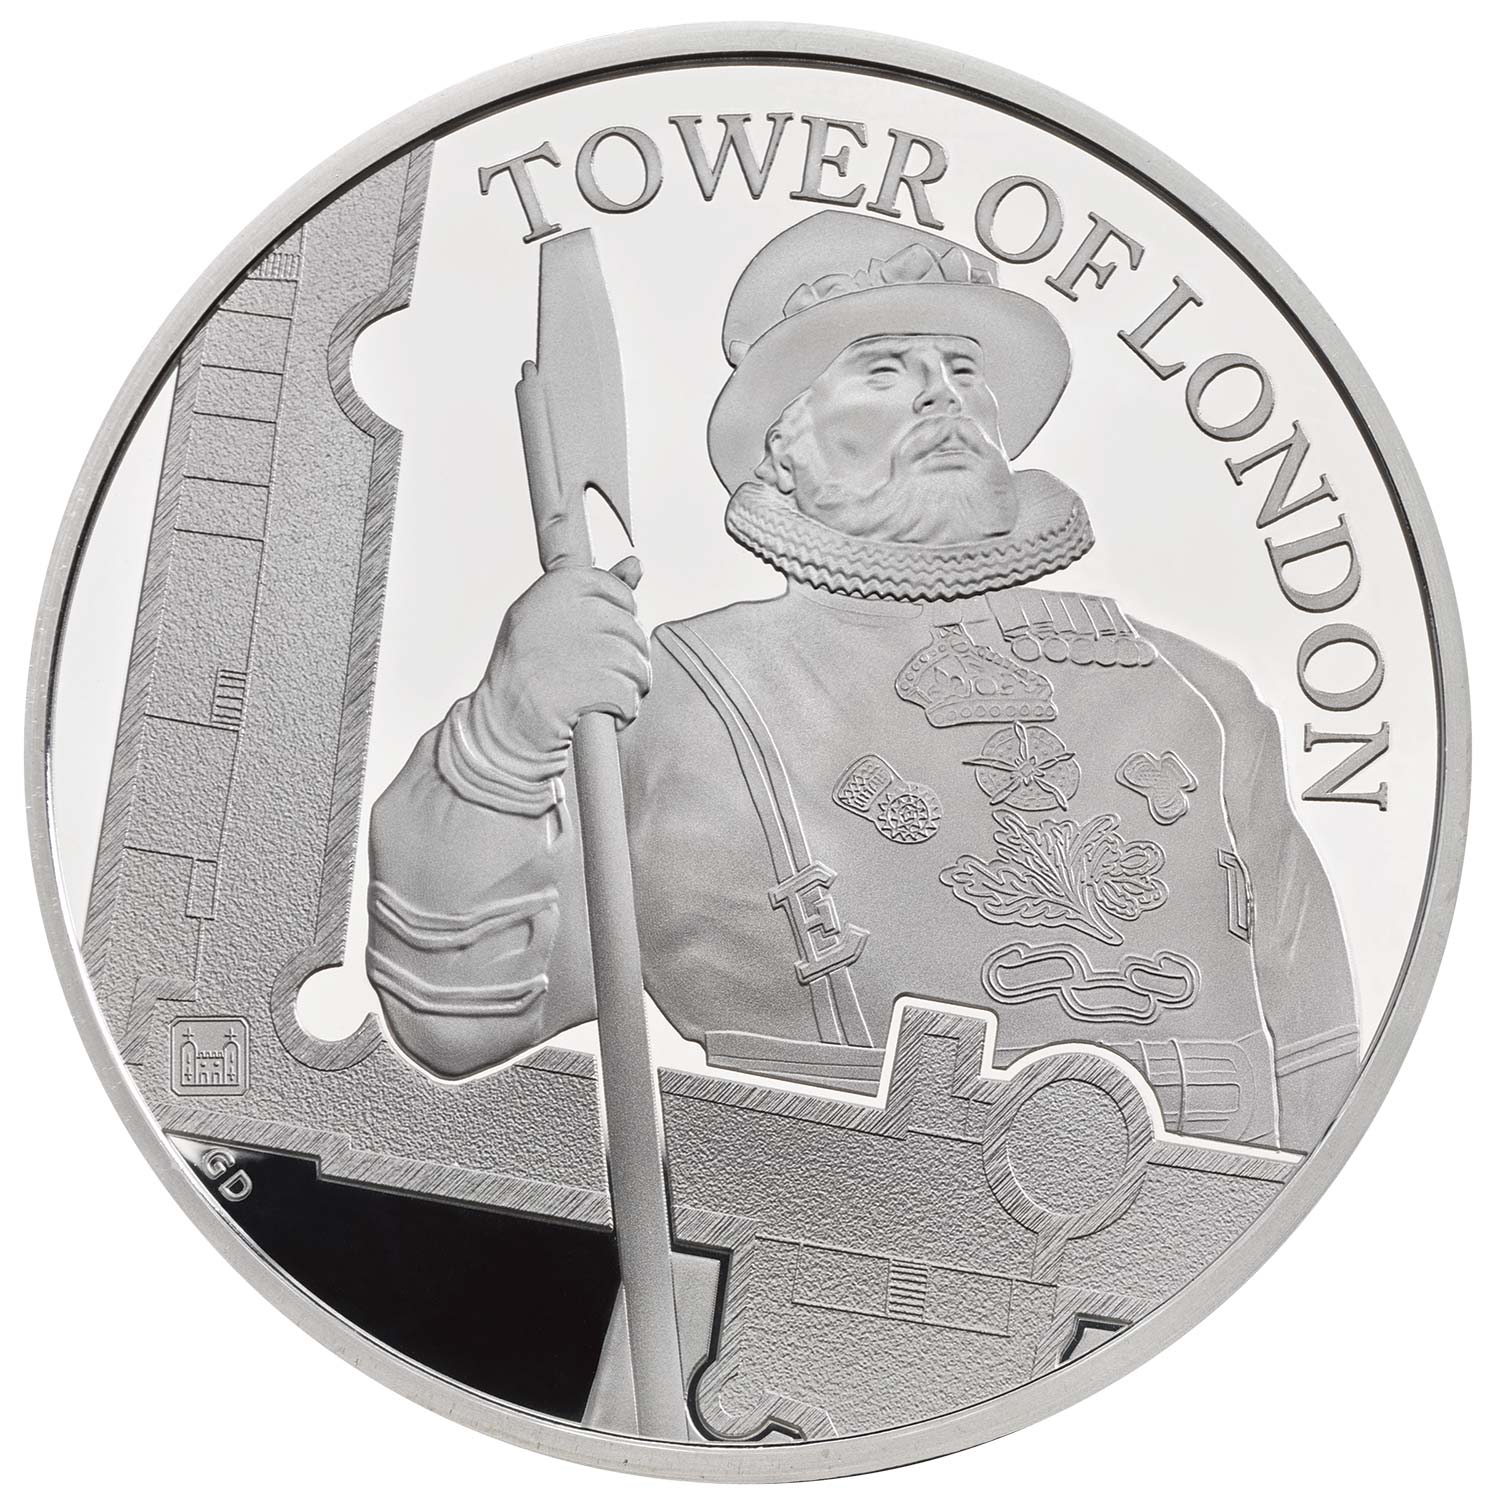 2019 Brilliant Uncirculated £5 Yeoman's Warder Coin TOWER OF LONDON 